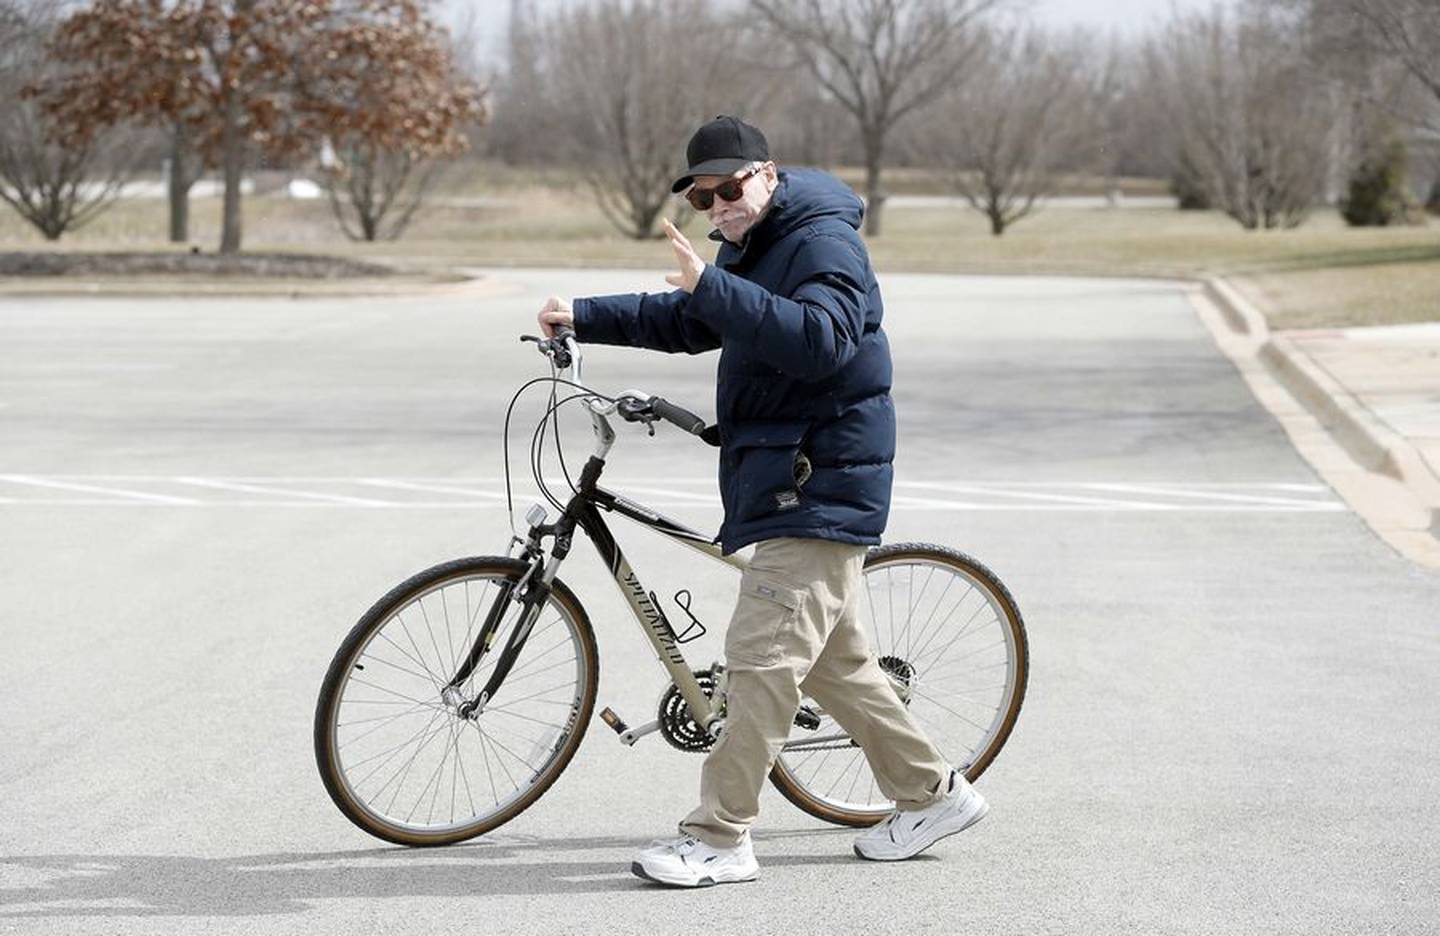 Mike Bruce says his new bike rides much better than the one he was walking with along Route 62 when Huntley police officer Joe Lanute saw him earlier this month. Lanute secured a used bike -- donated by Lucky Brake Bicycles in Crystal Lake -- for Lanute.